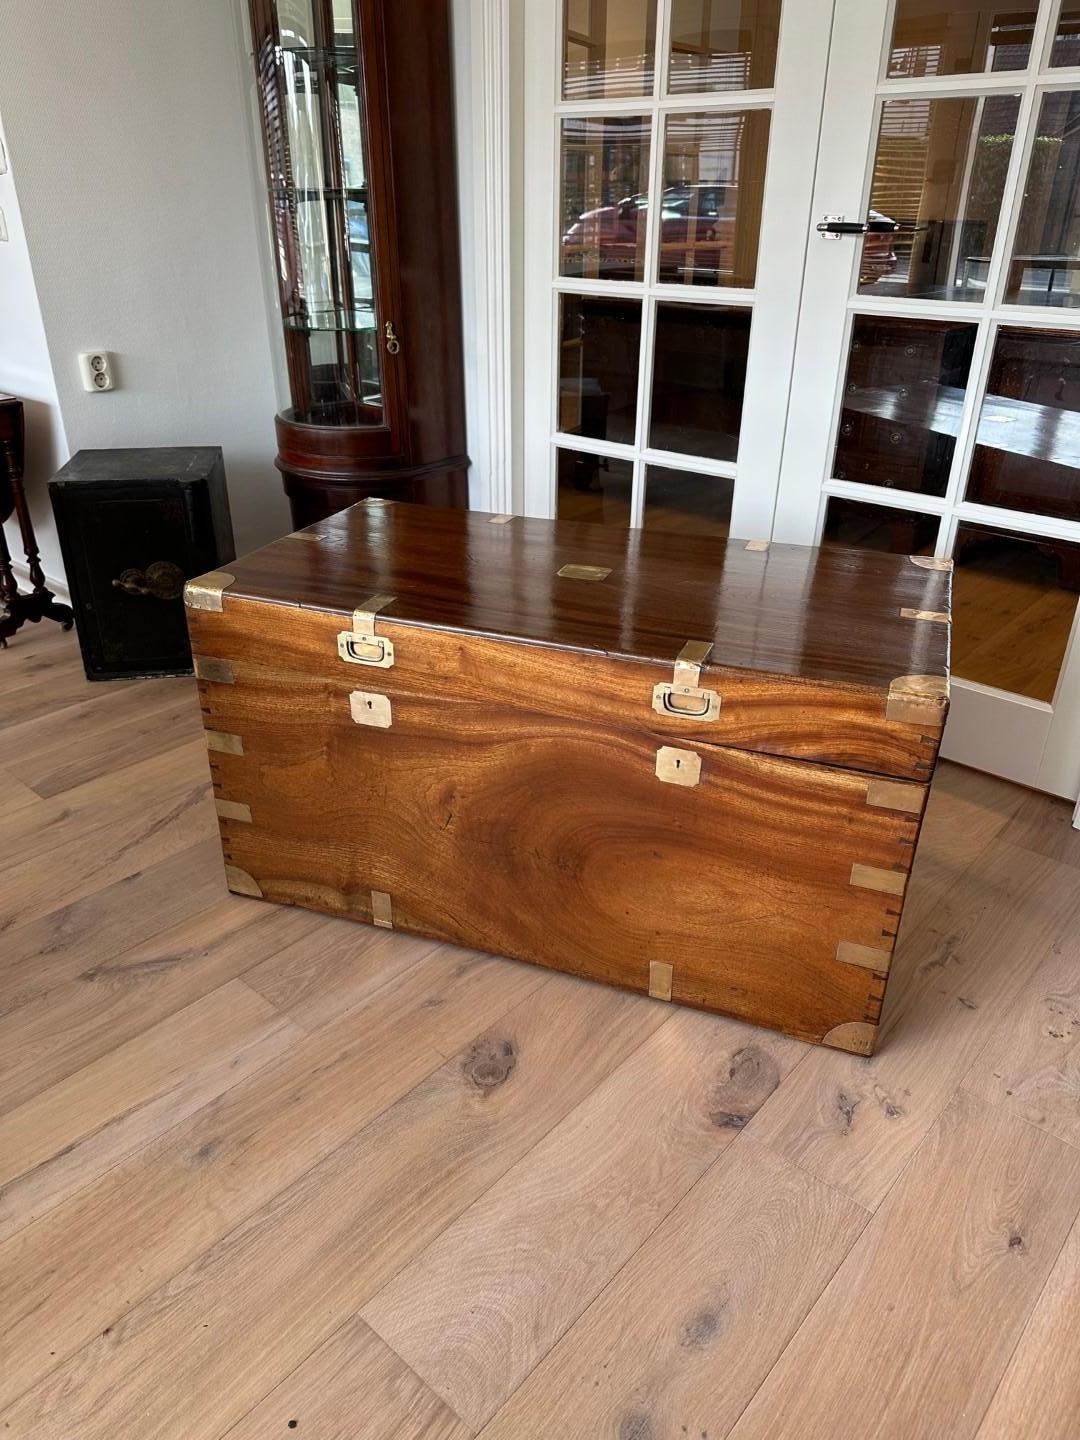 Antique 19th century camphor wooden transport box in very good condition. Beautiful warm color and appearance.

In the 18th and 19th centuries, camphorwood chests became popular in Europe, especially in England and the Netherlands. These chests were